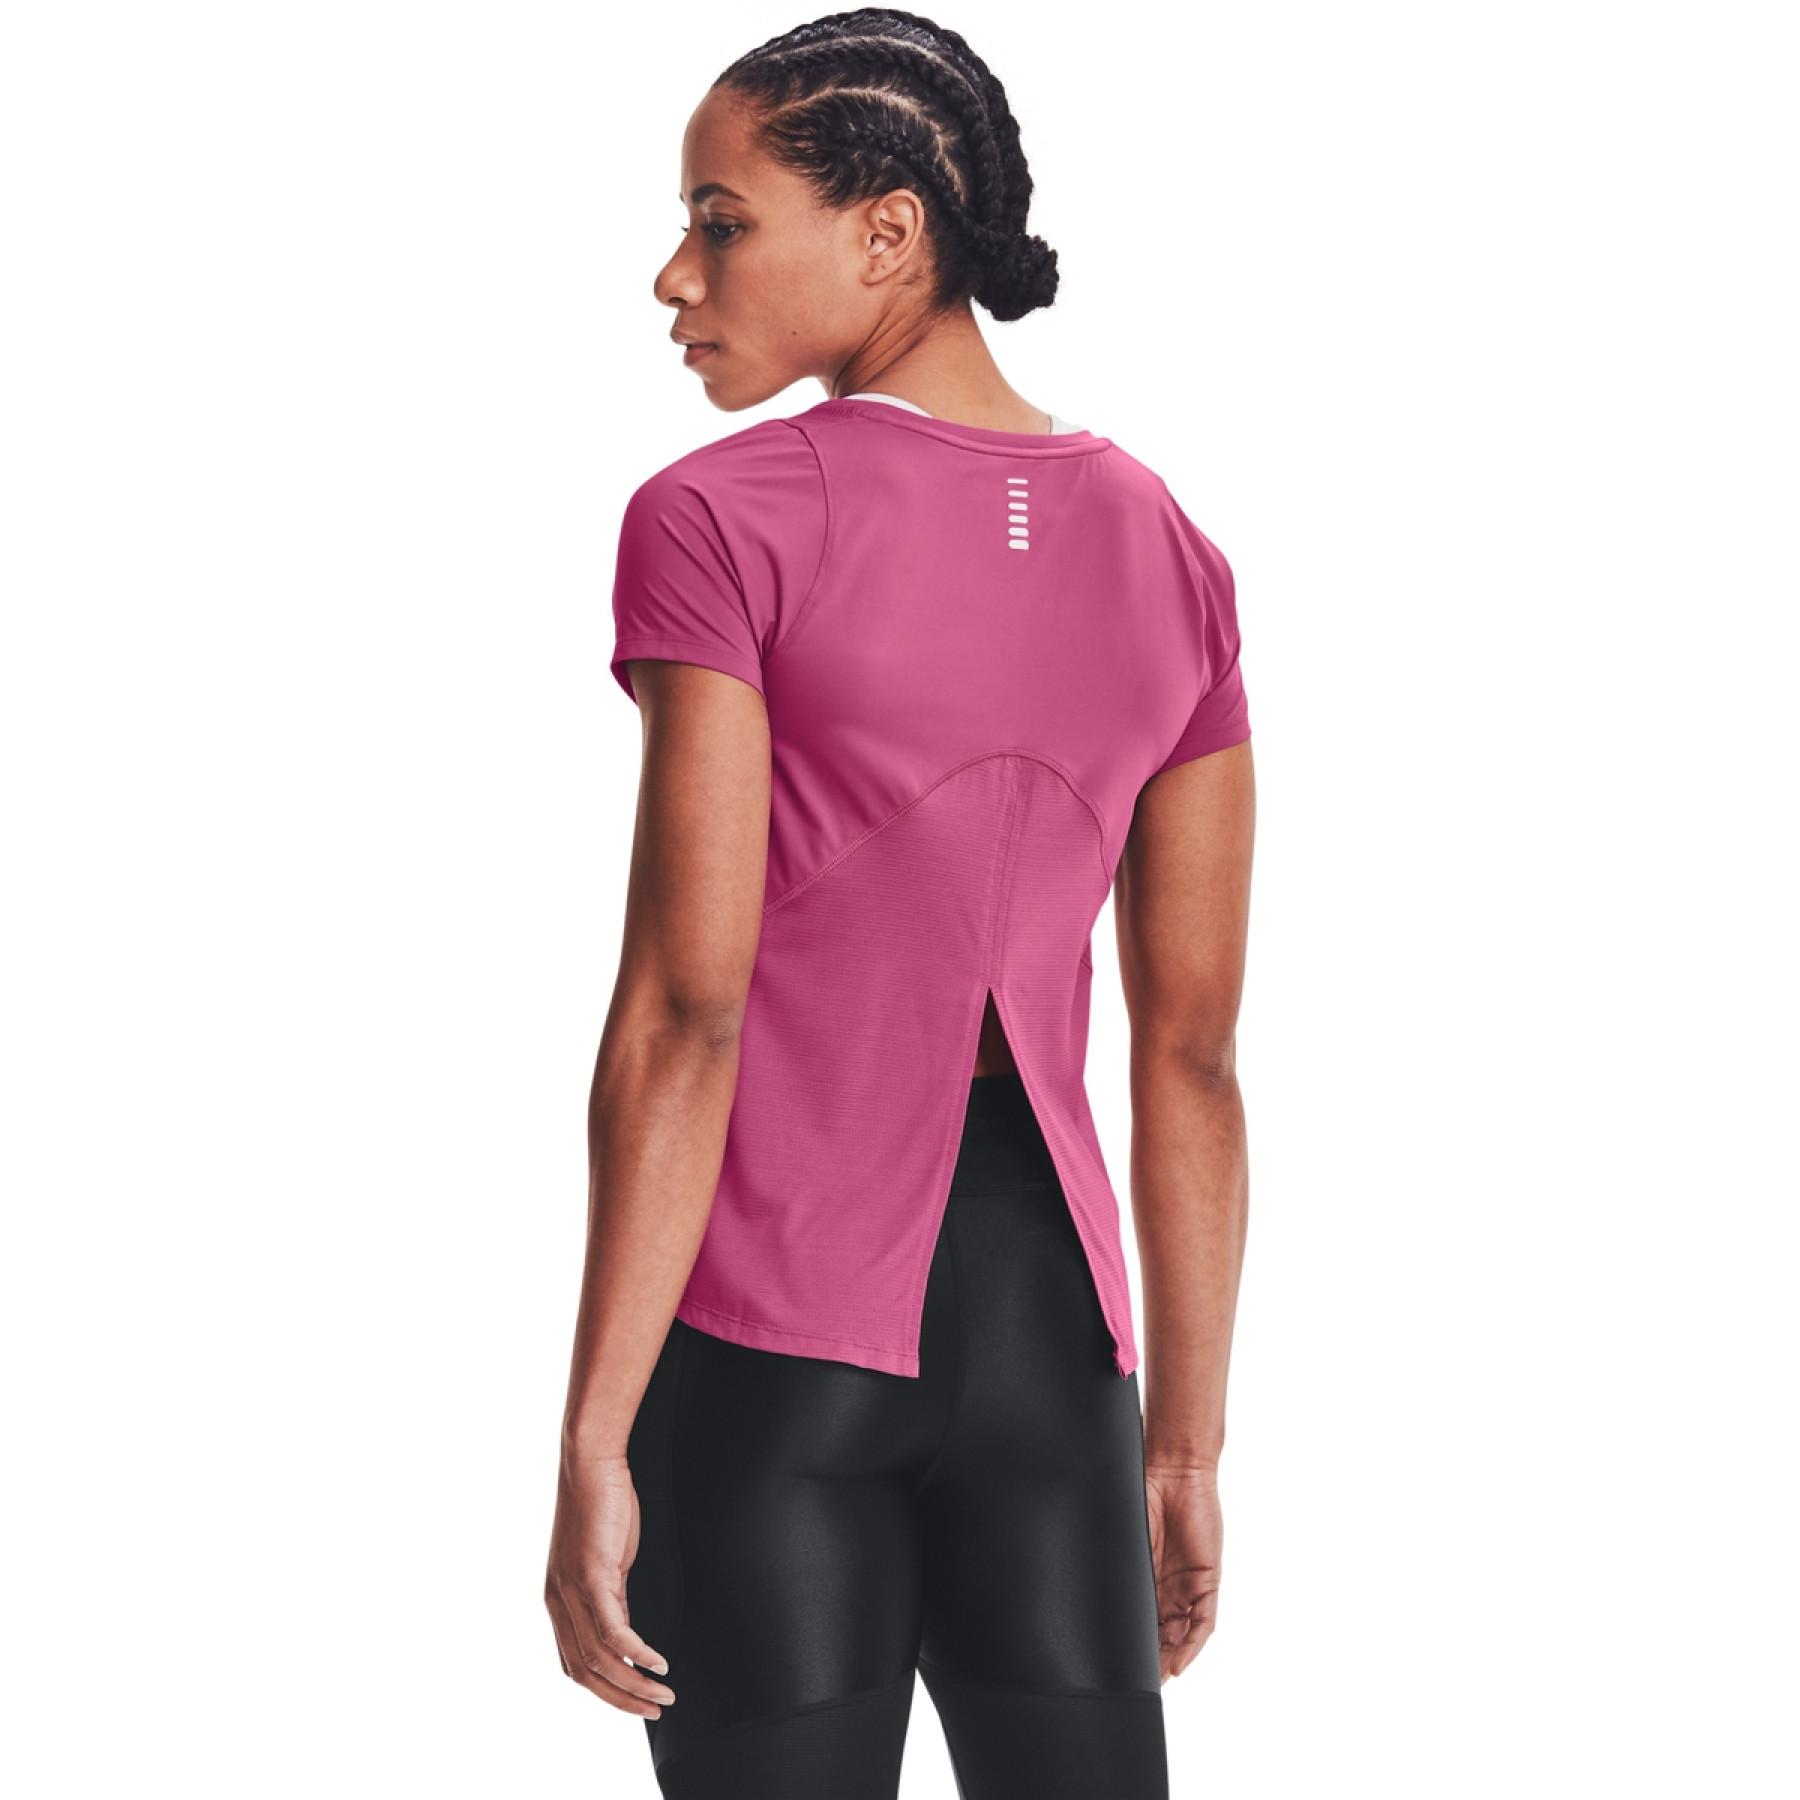 Maillot de mujer Under Armour à manches courtes iso-chill Run